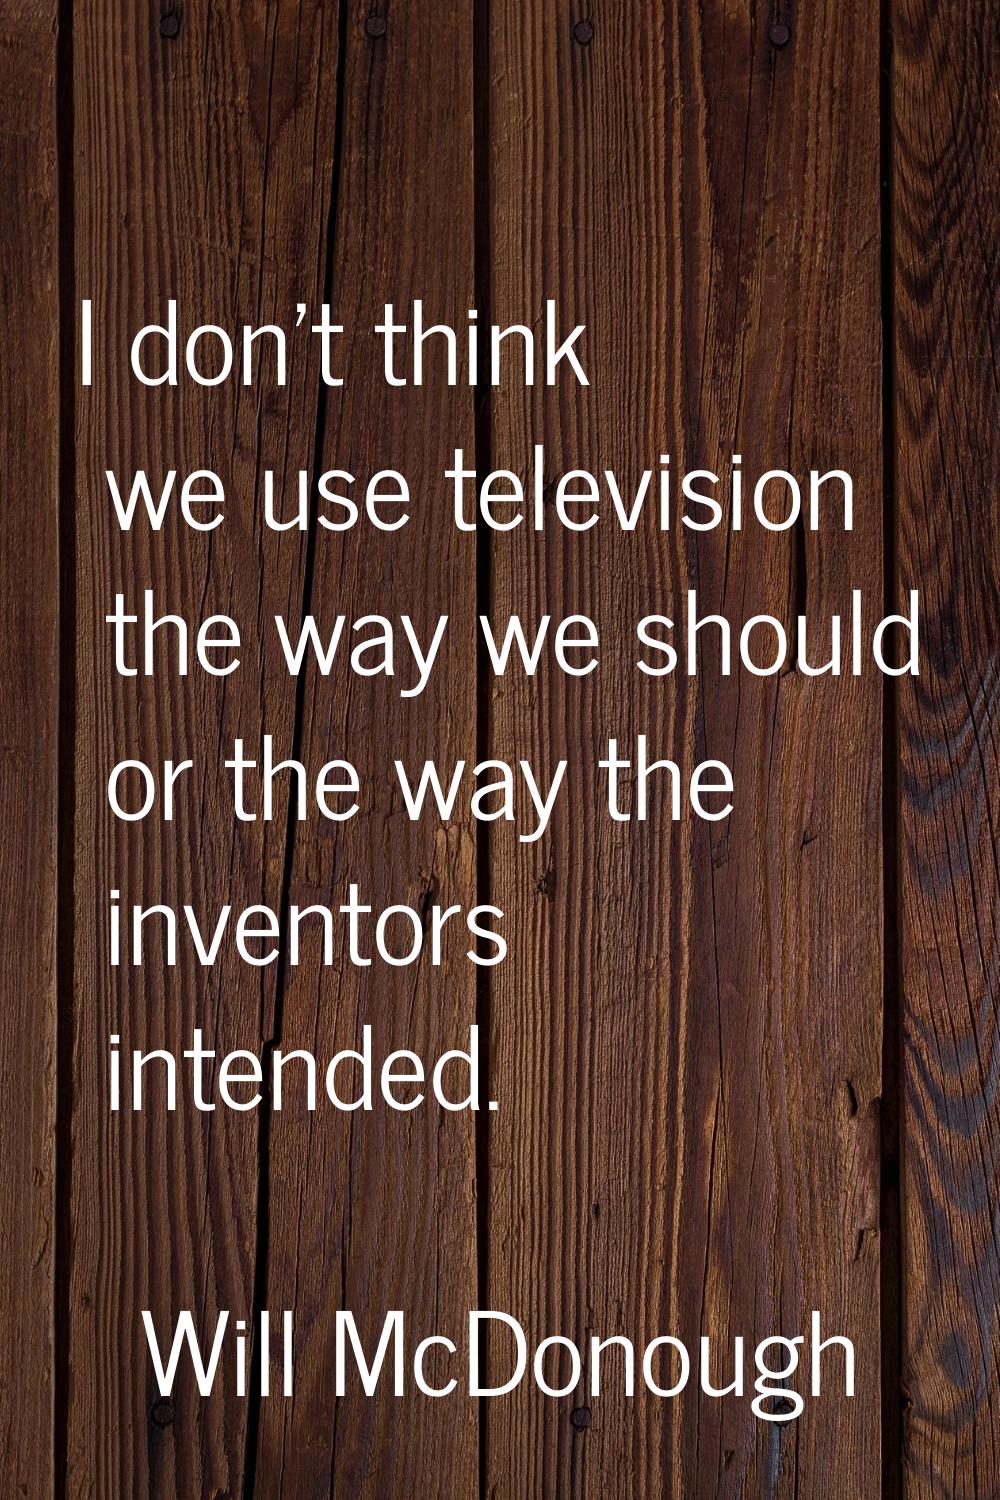 I don't think we use television the way we should or the way the inventors intended.